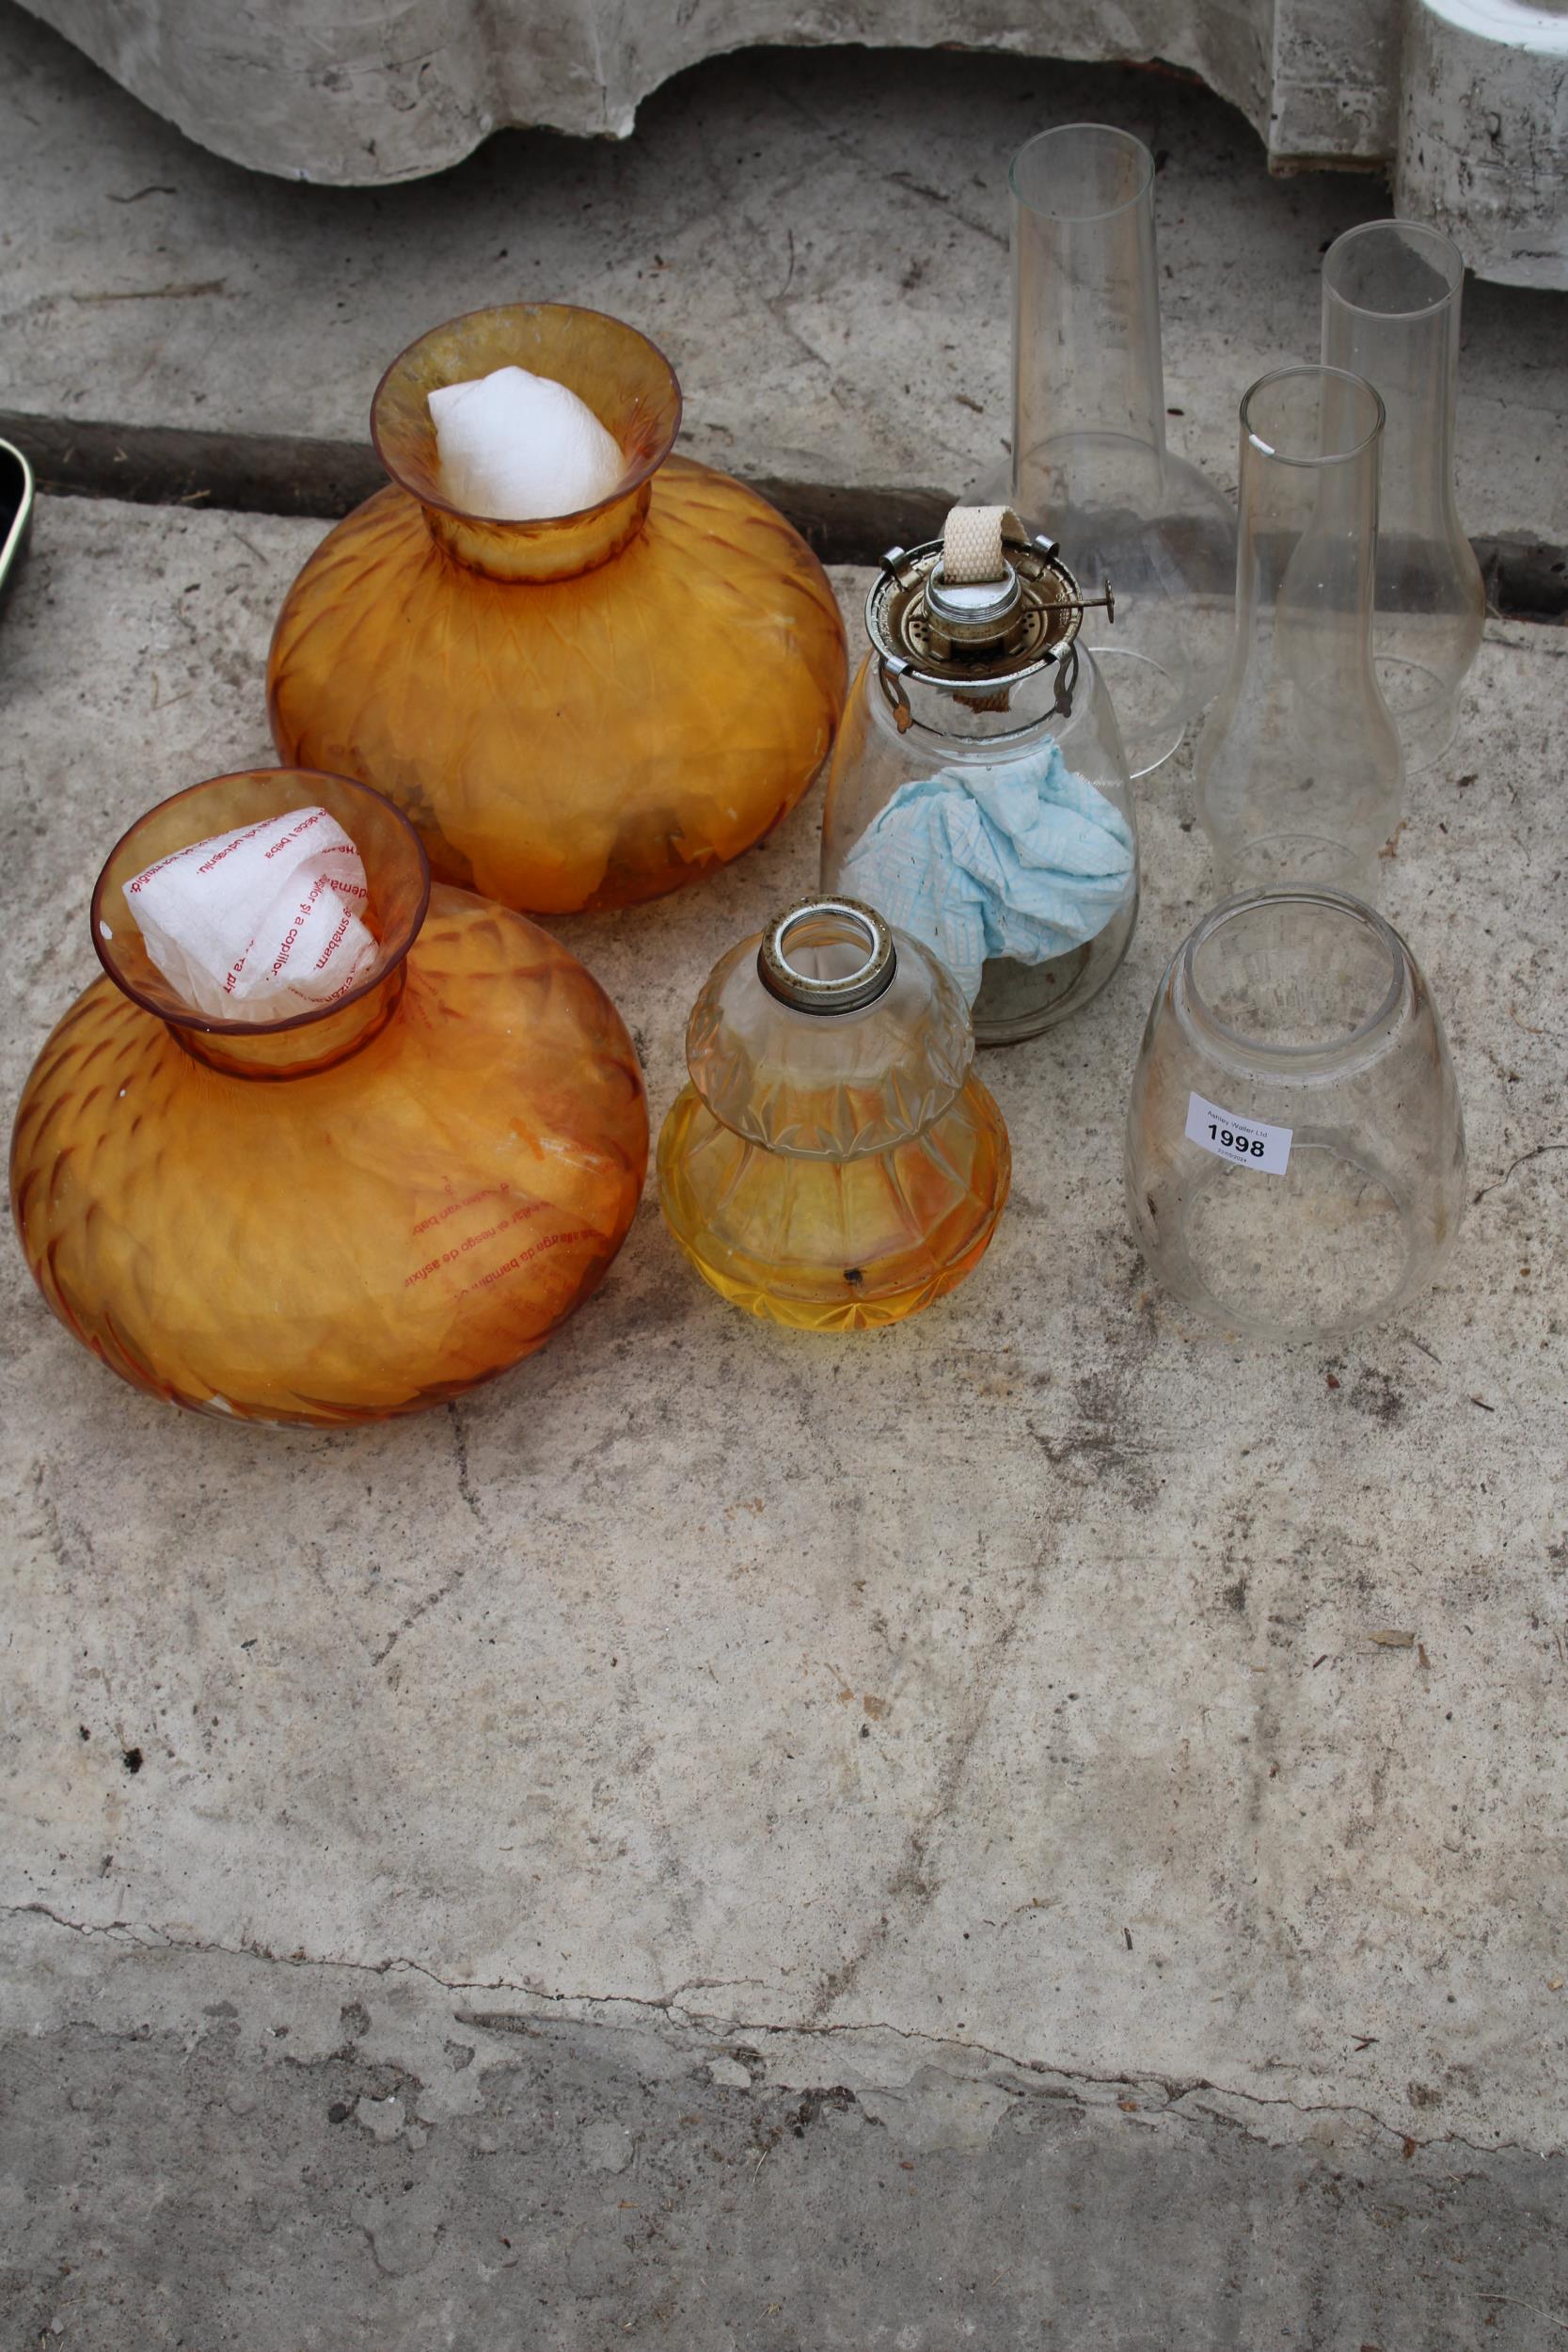 TWO GLASS OIL LAMPS WITH CLEAR AND ORANGE GLASS SHADES